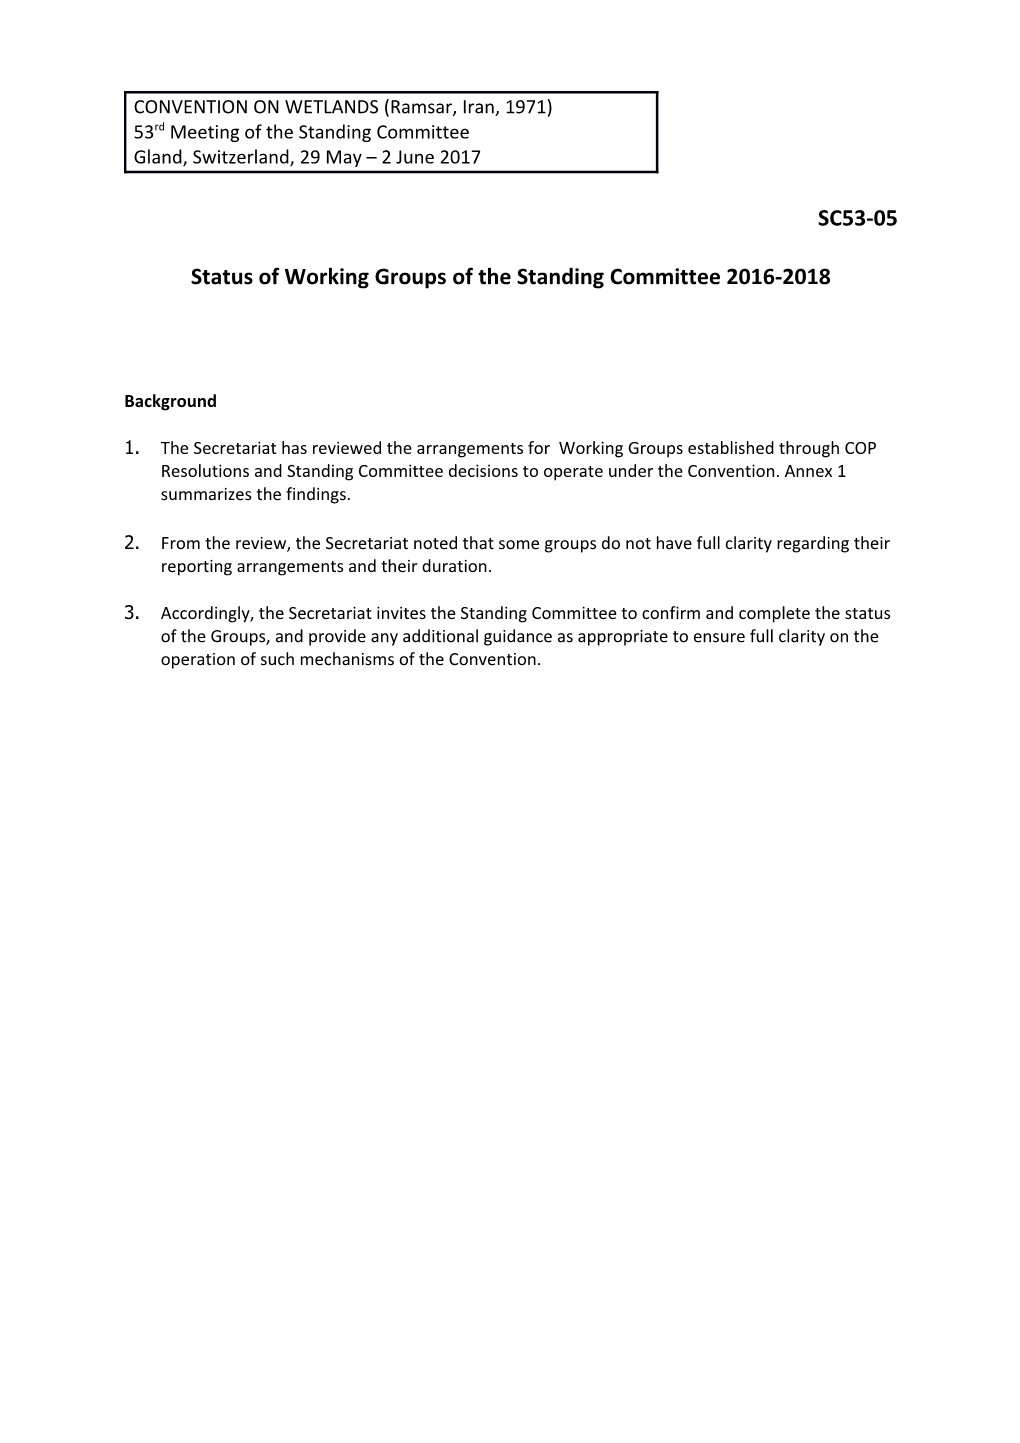 Status of Working Groups of the Standing Committee 2016-2018